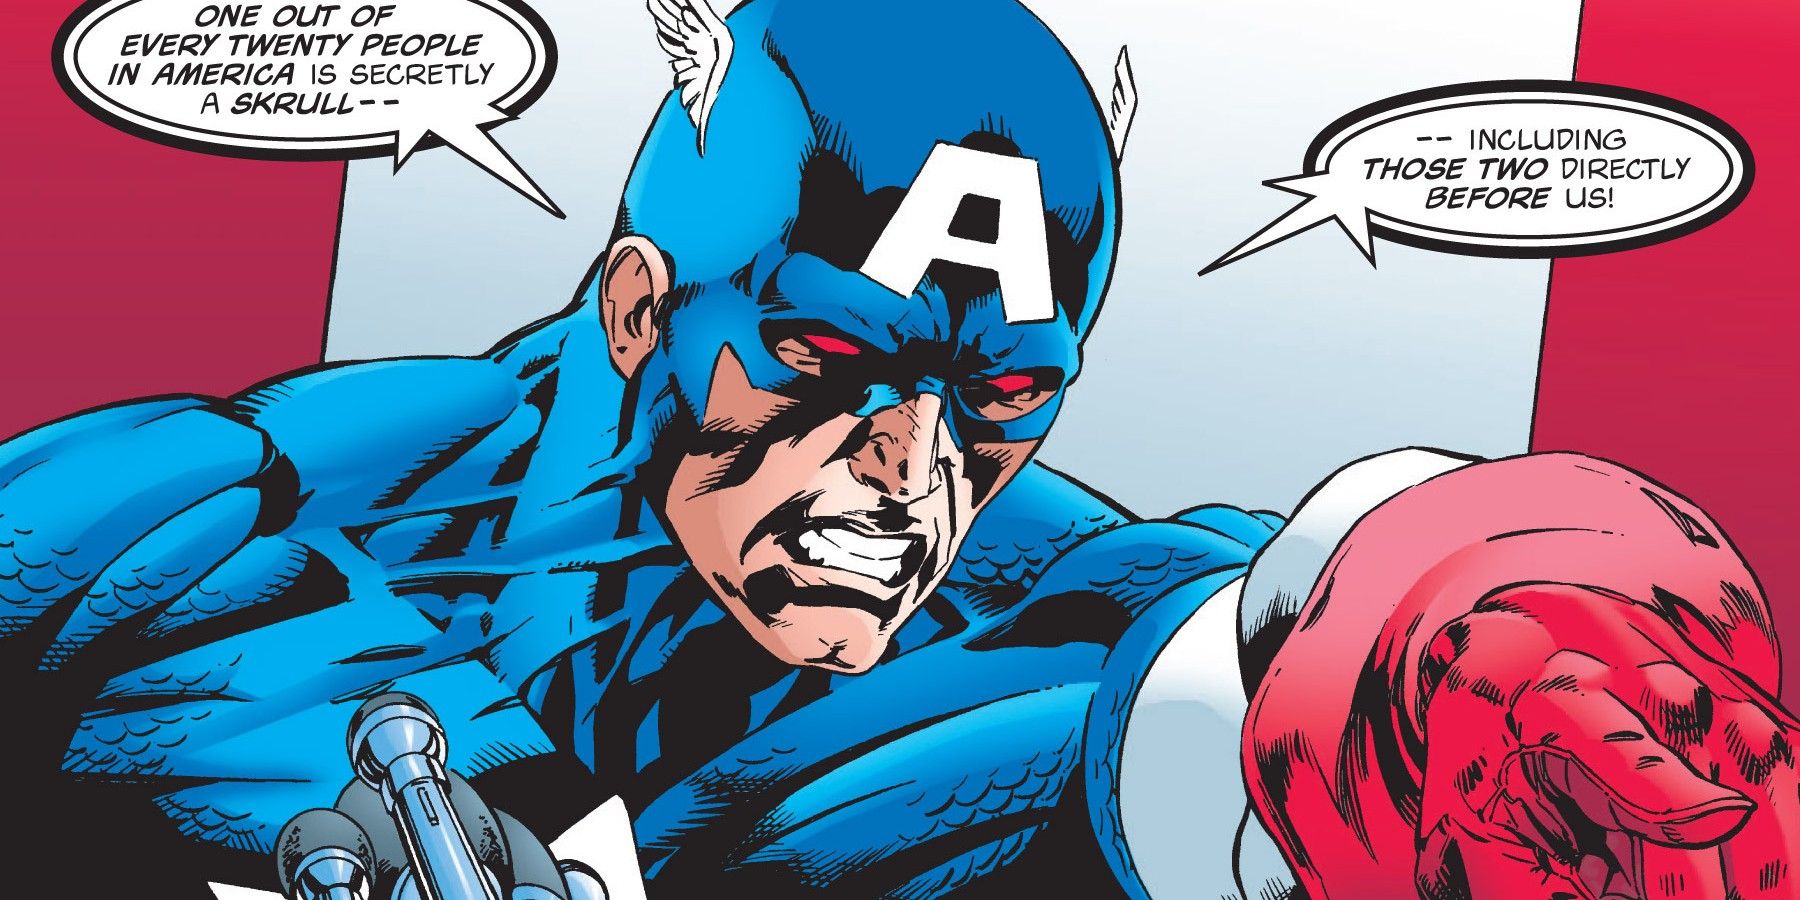 A Skrull Impersonates Captain America and Incites Panic